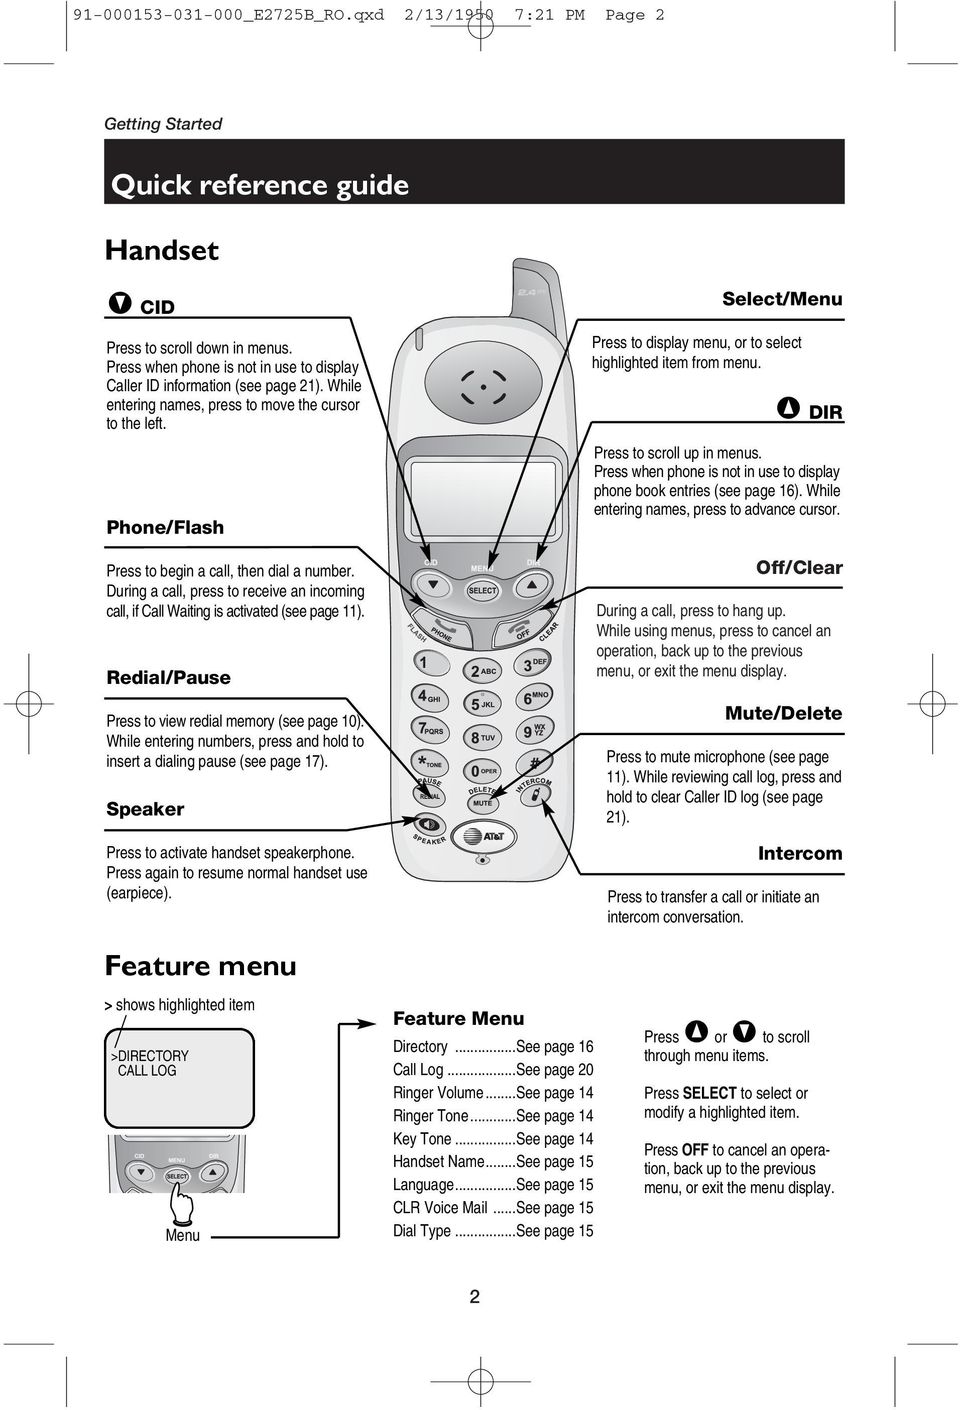 During a call, press to receive an incoming call, if Call Waiting is activated (see page 11). Redial/Pause Press to view redial memory (see page 10).